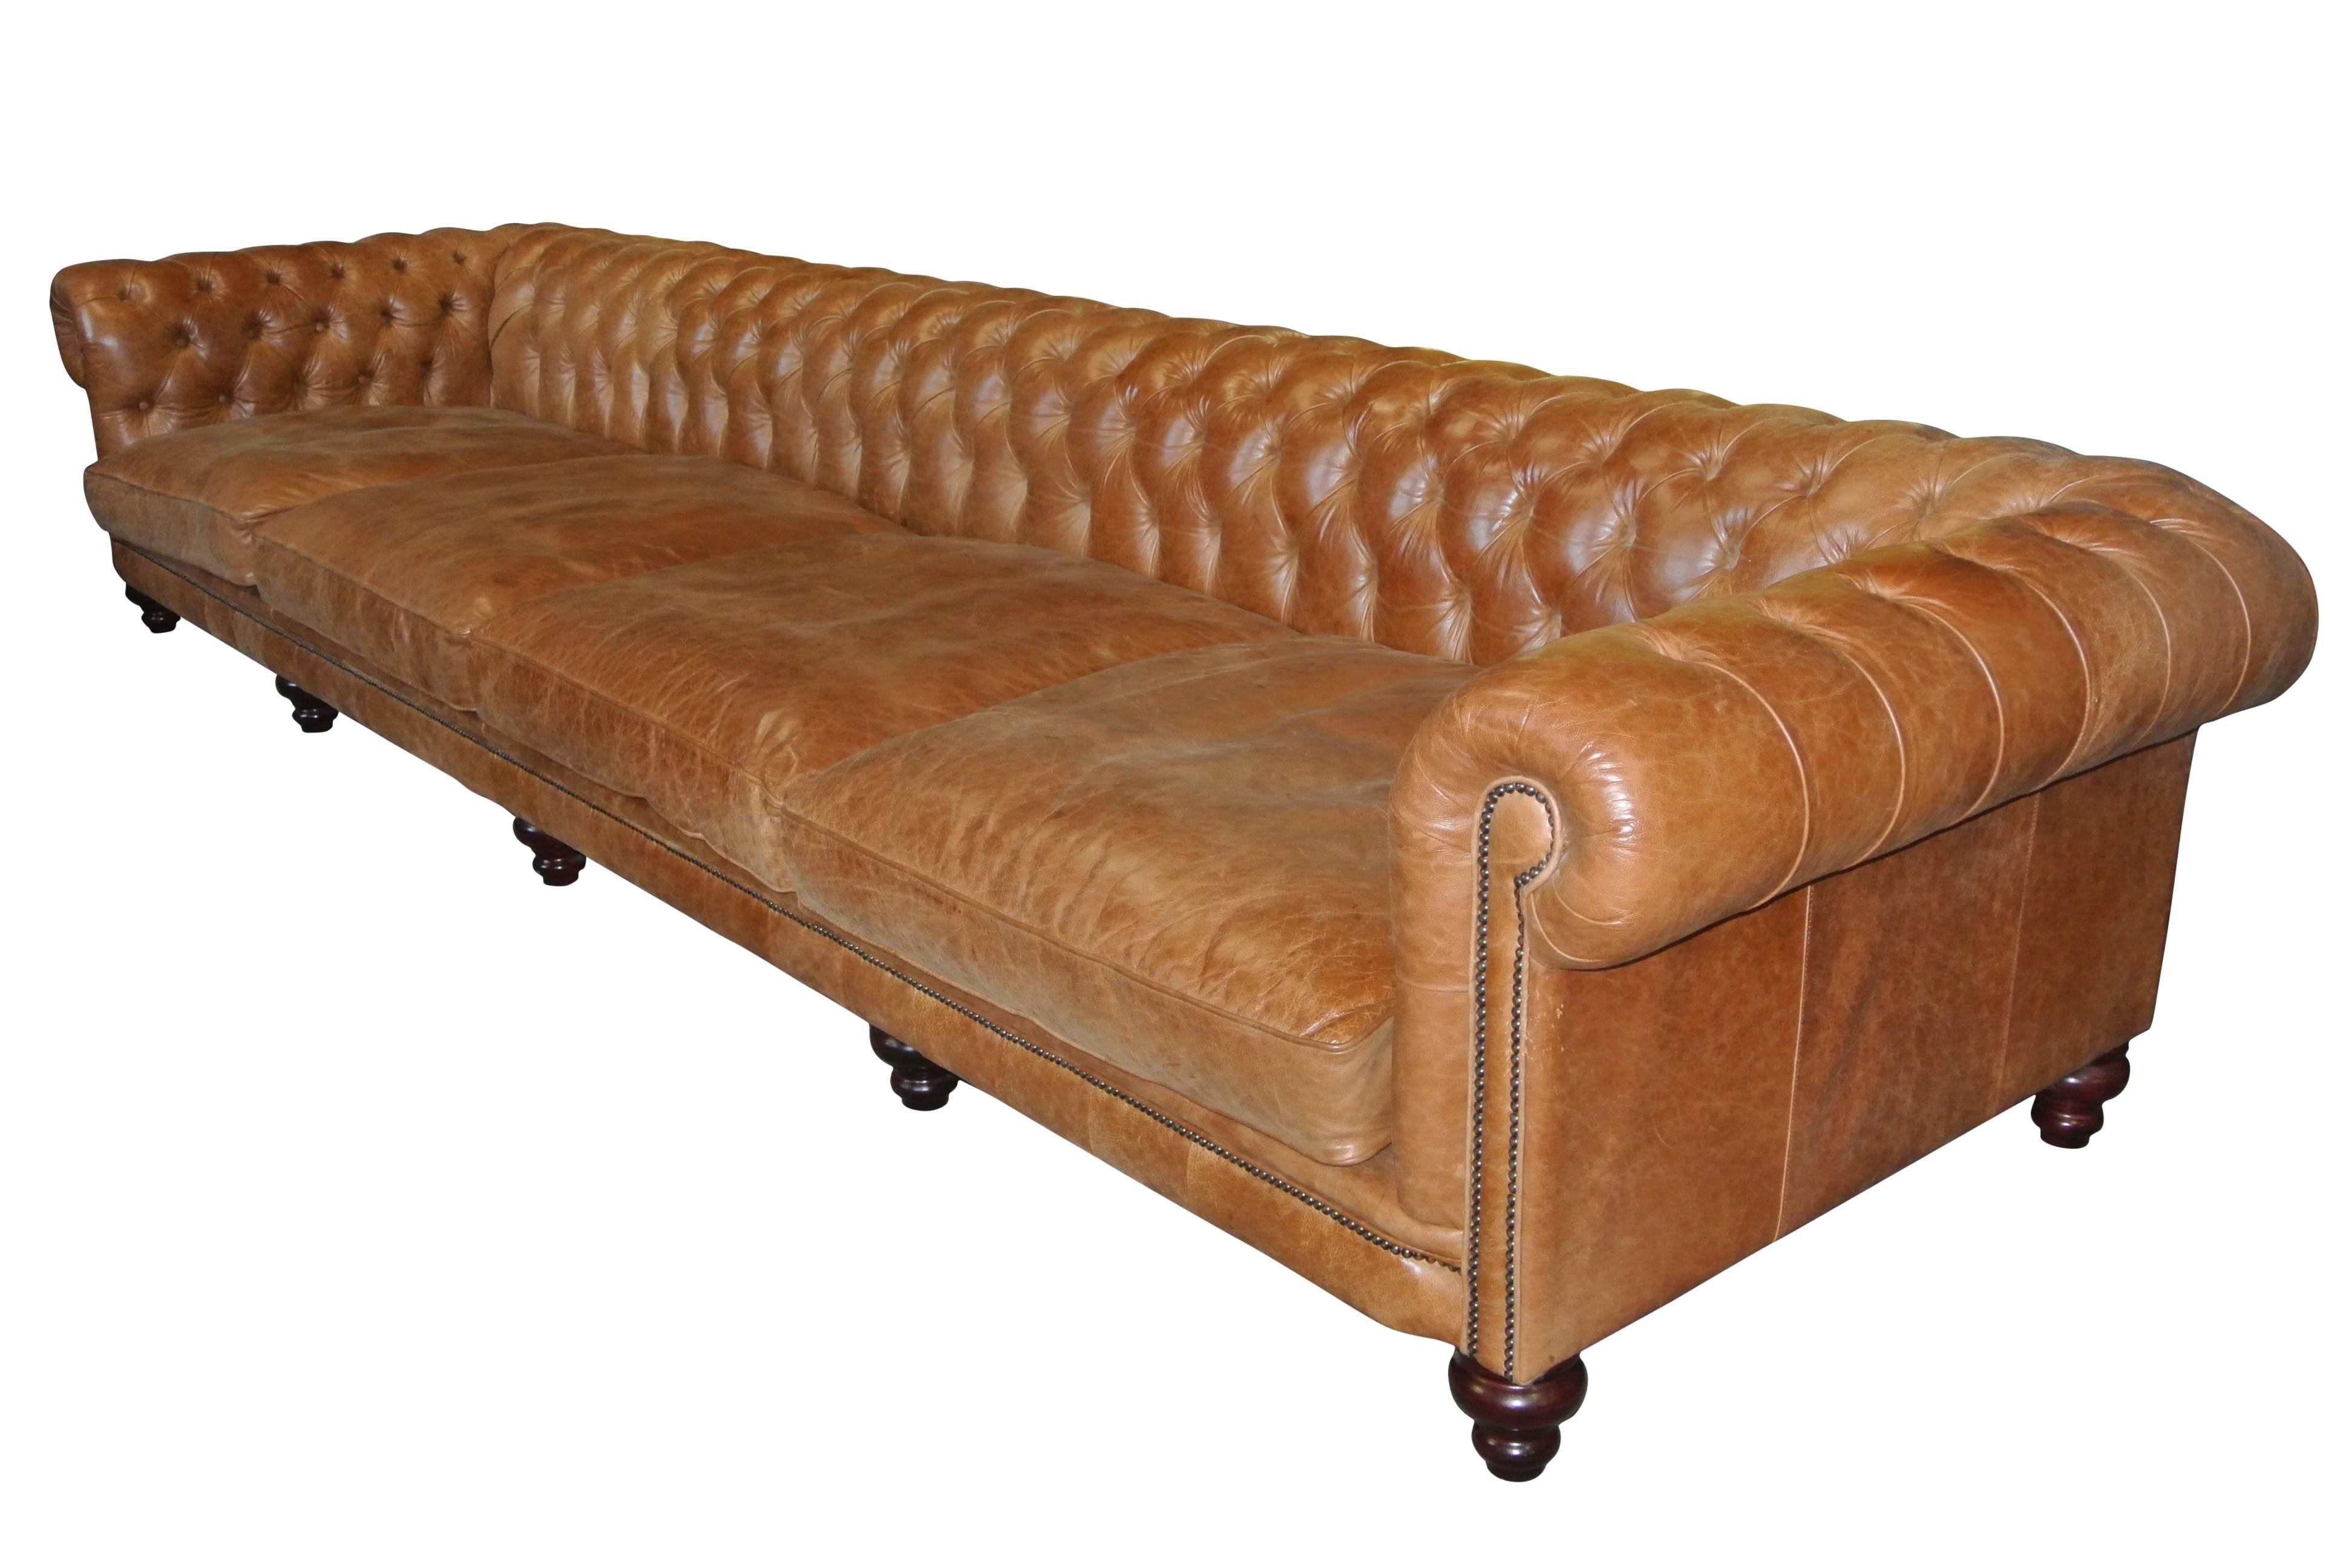 Very large handmade Chesterfield settee in chestnut brown leather.